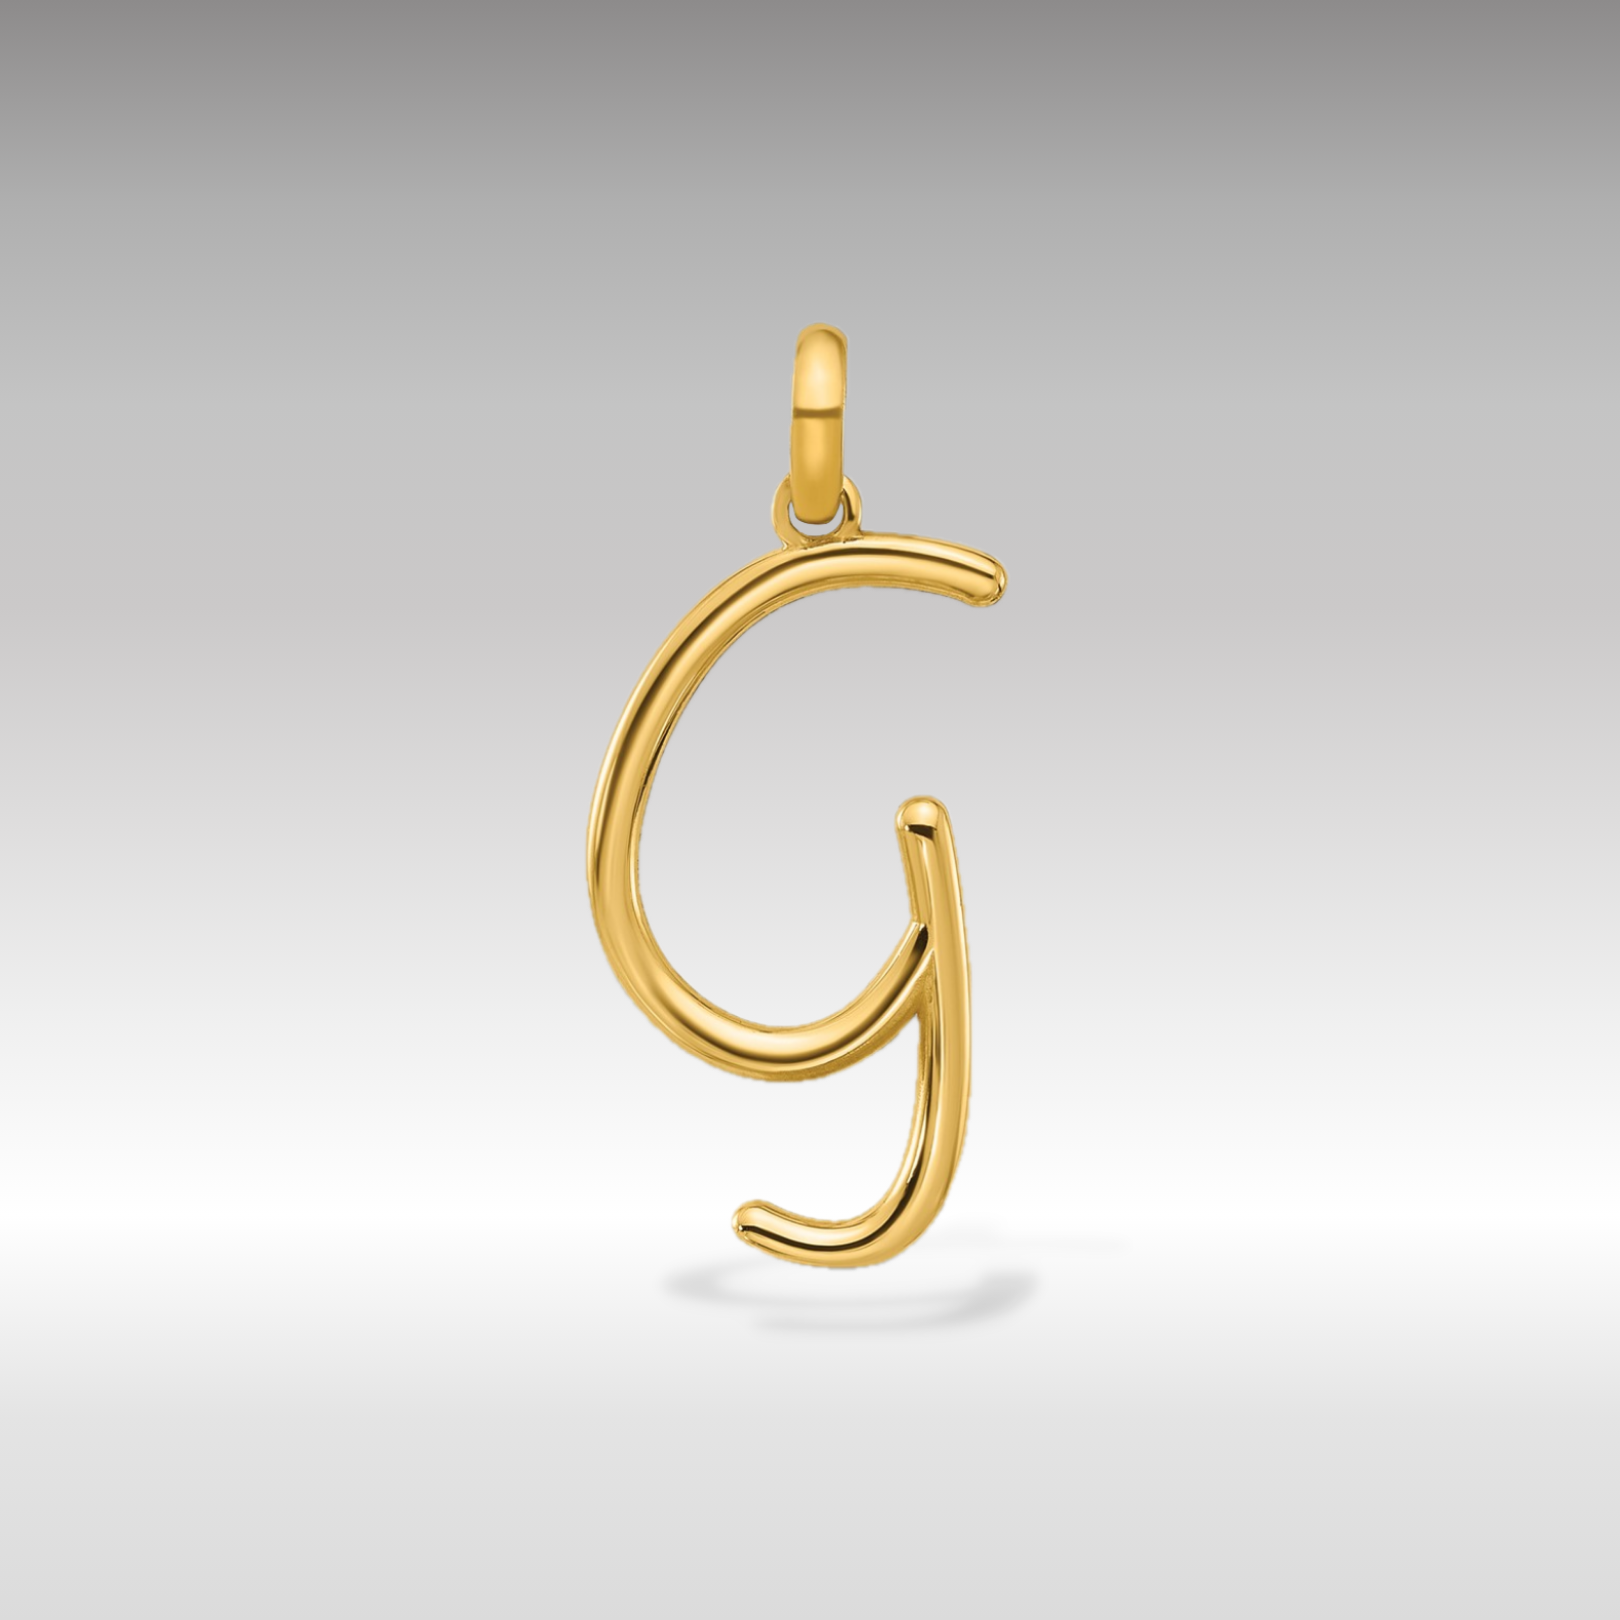 14K Gold Fancy Letter 'G' Charm Pendant - Charlie & Co. Jewelry